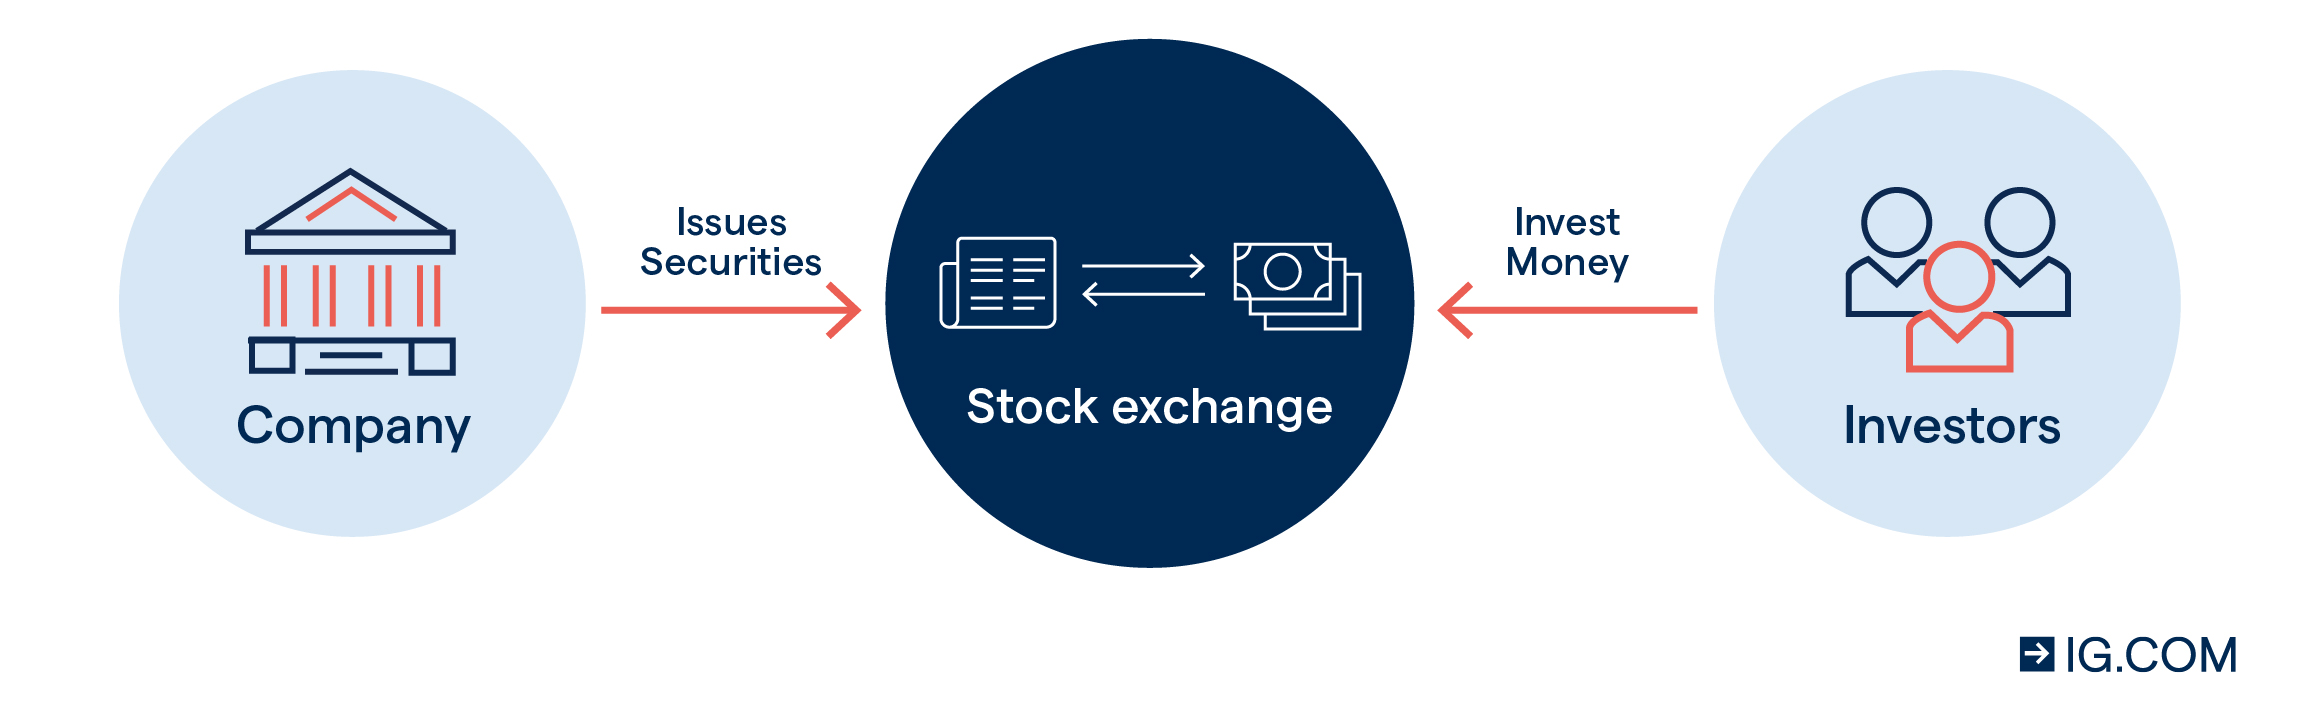 the process of how the stock market works, from a company’s stock entering the stock exchange and investors seeking to purchase the shares